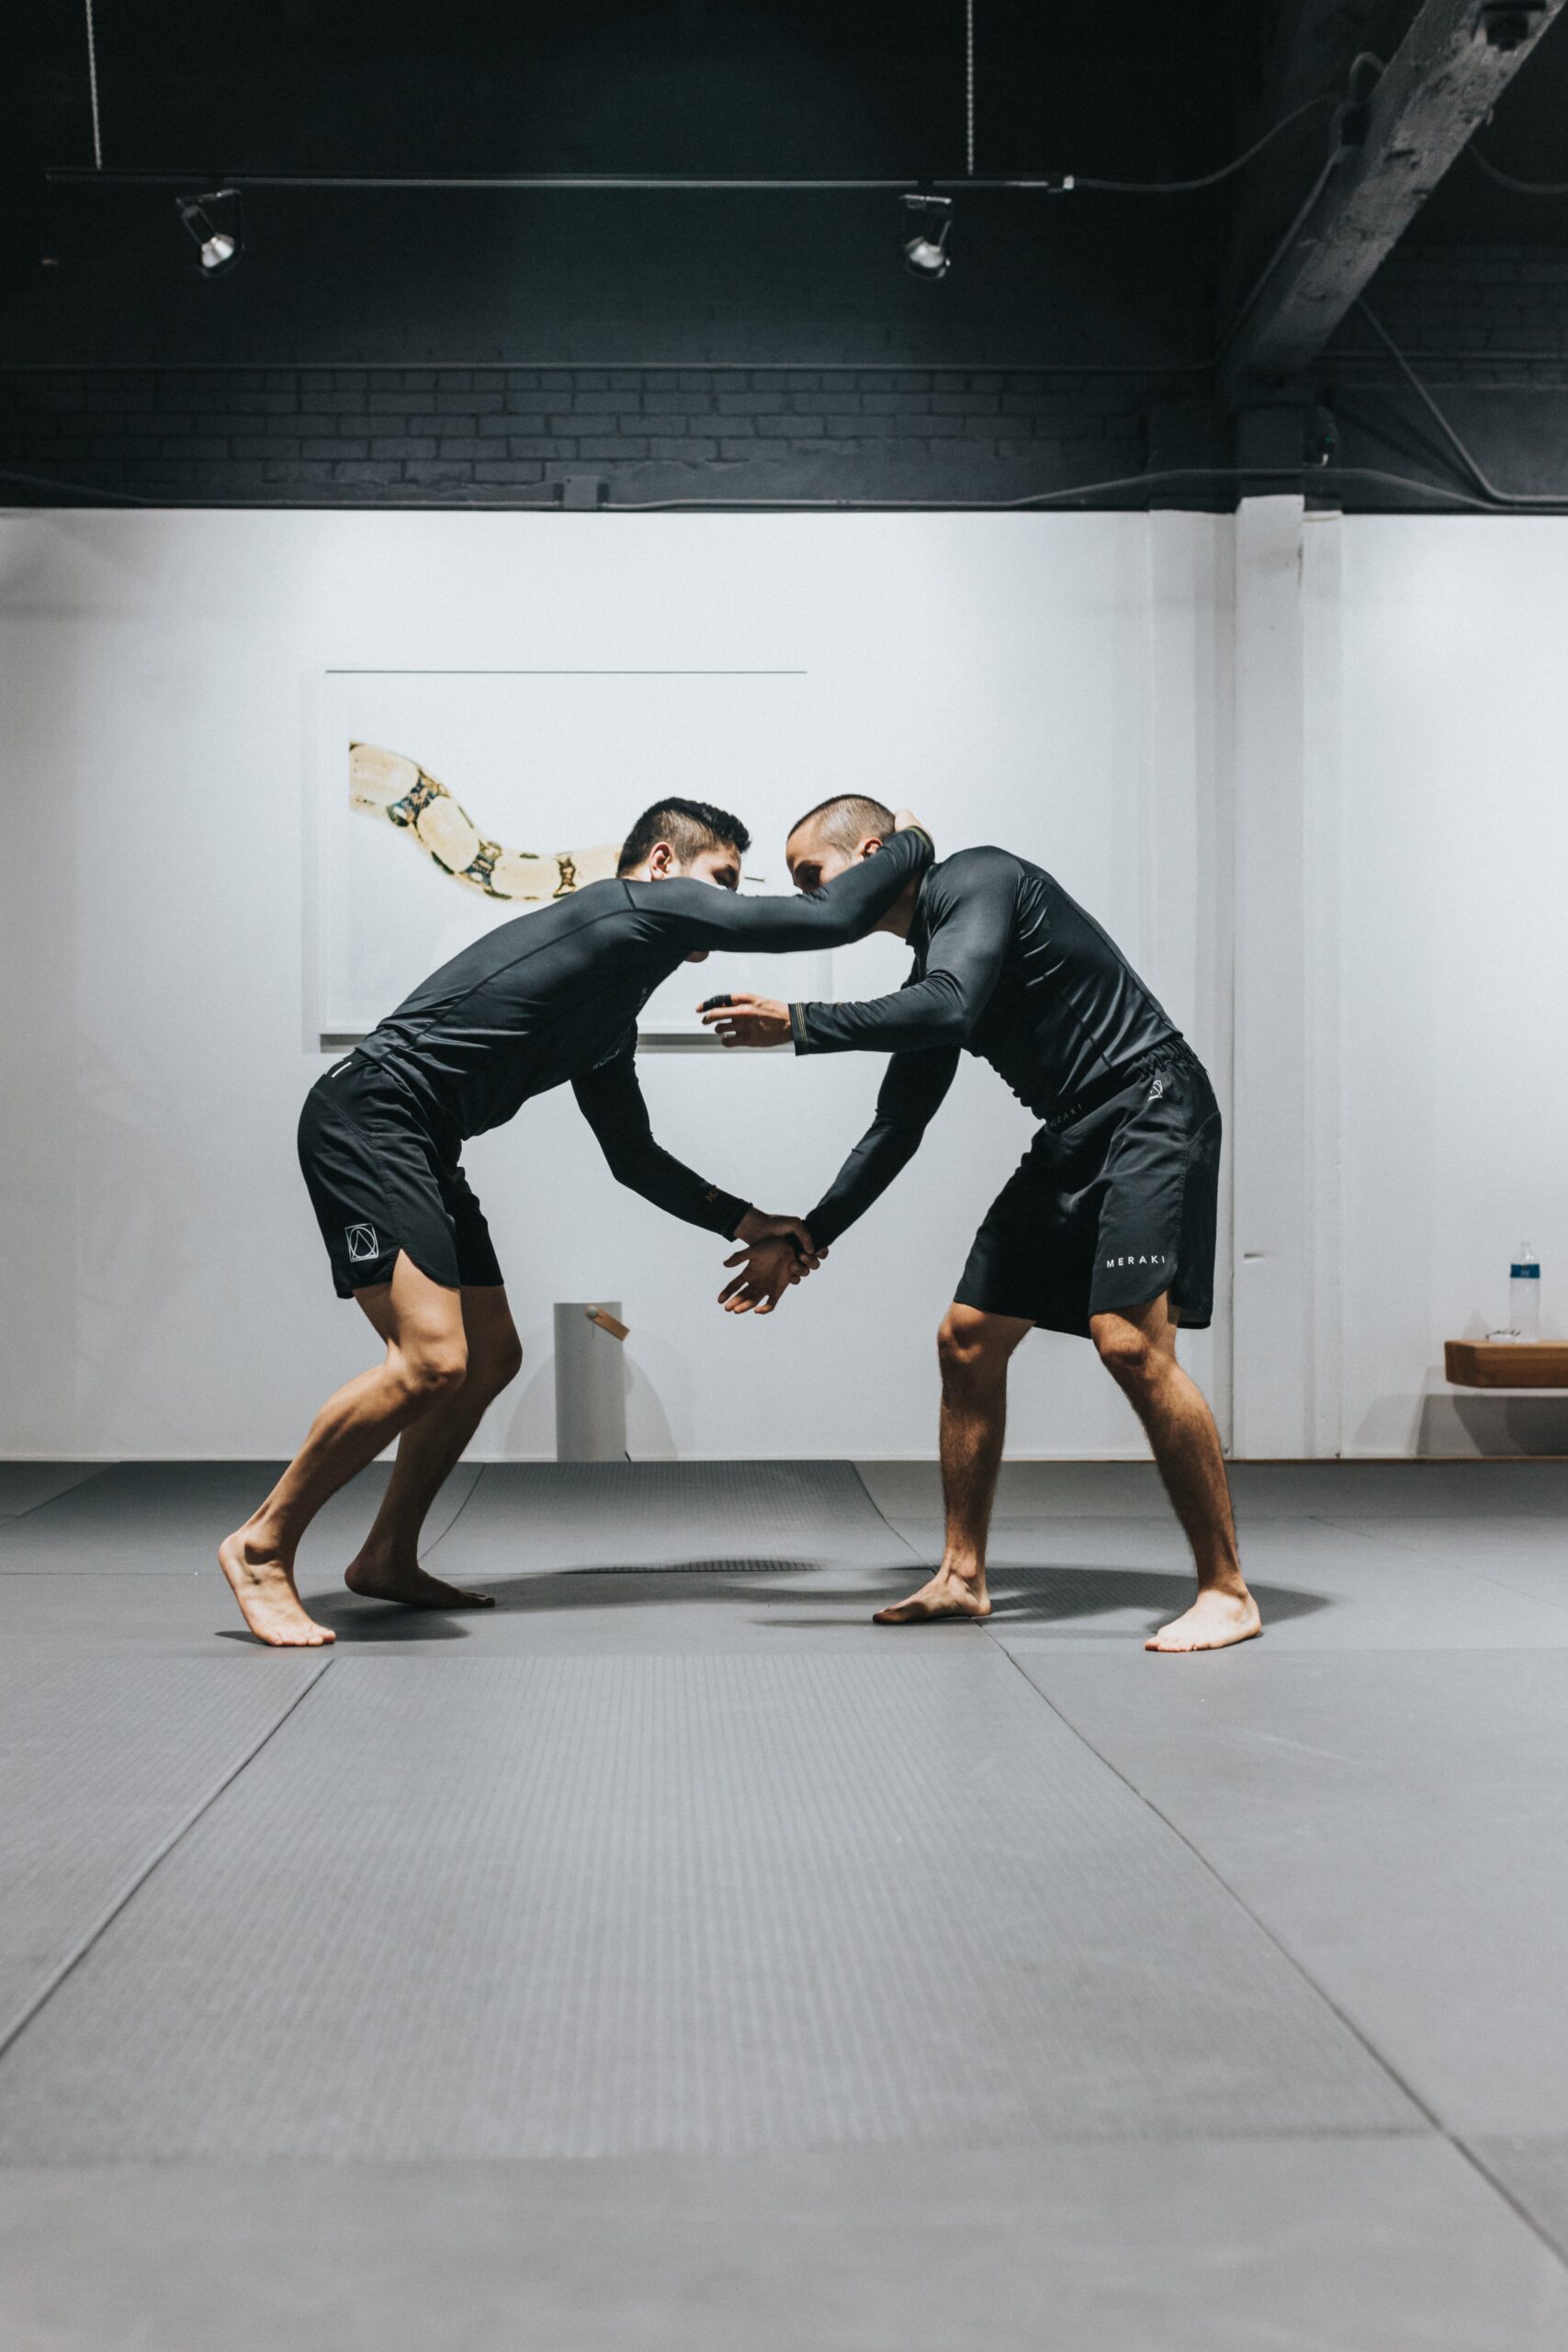 Build Your Own Martial Arts Studio For Practice at Home